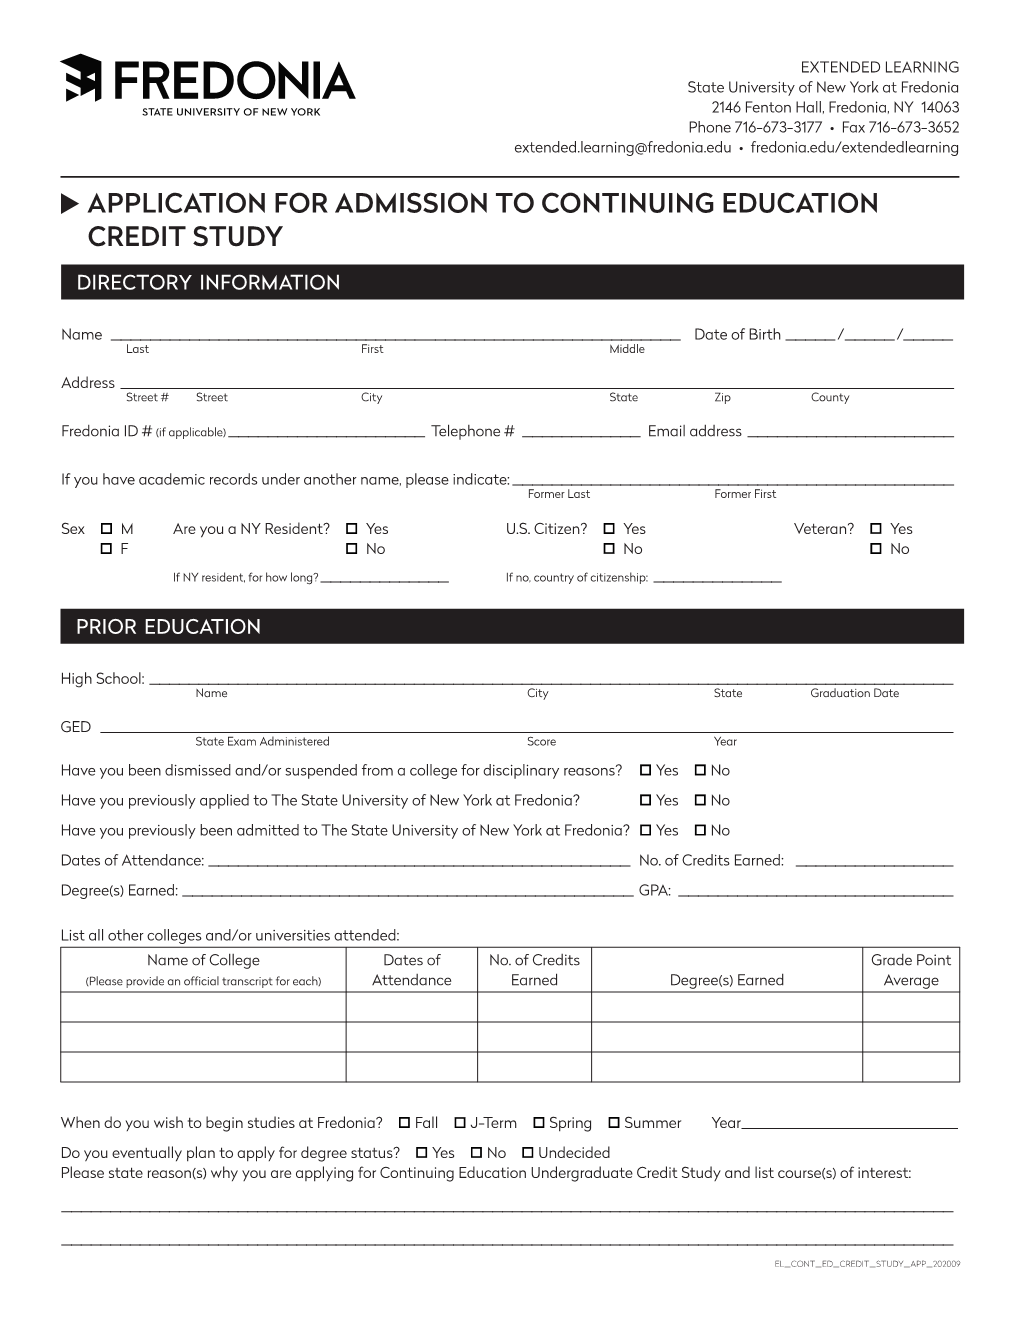 Application for Continuing Education Credit Study